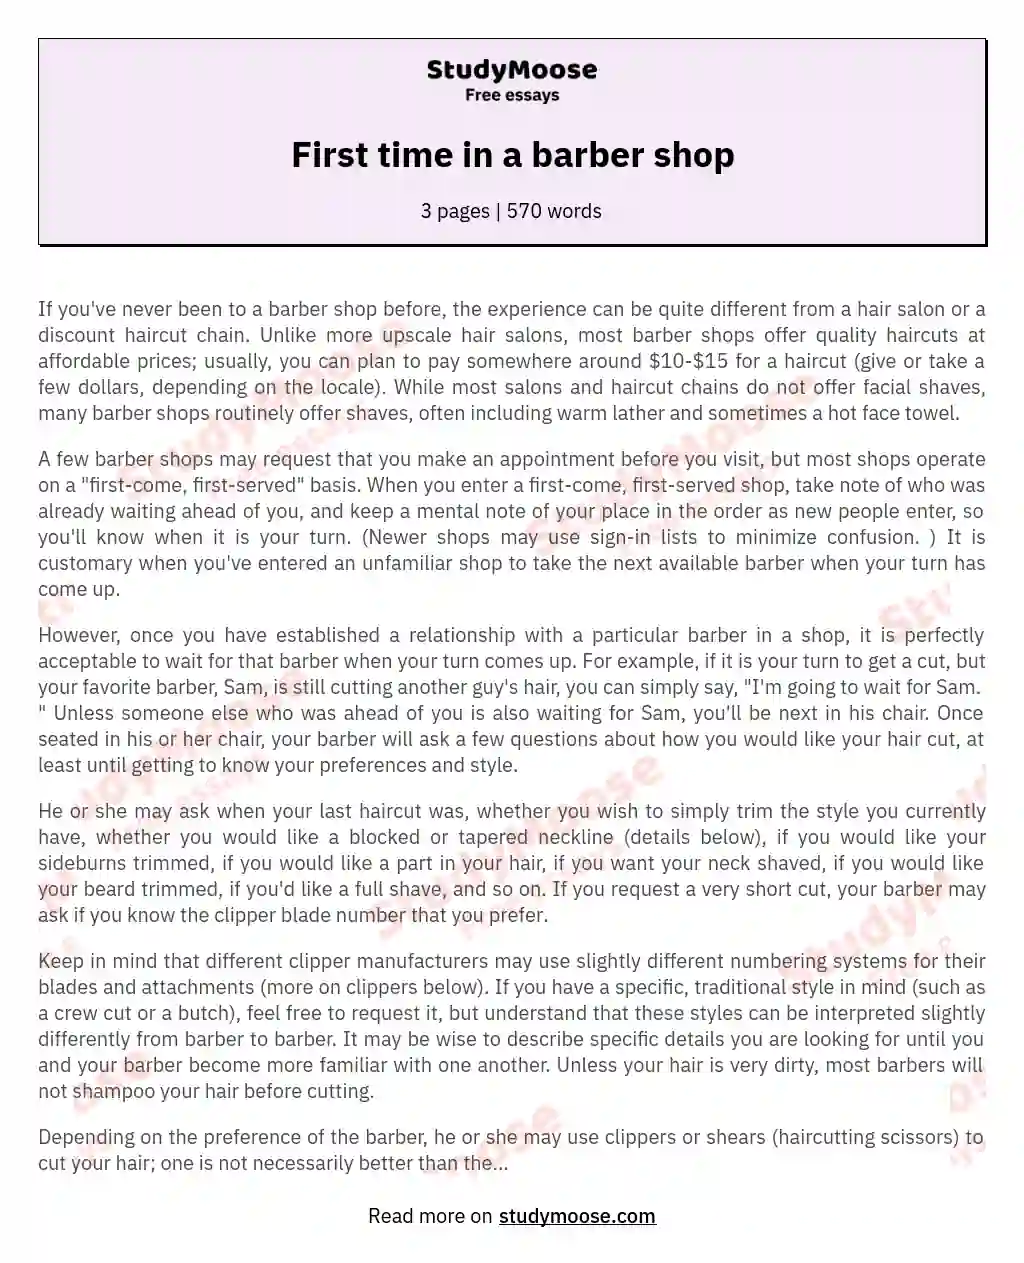 First time in a barber shop essay